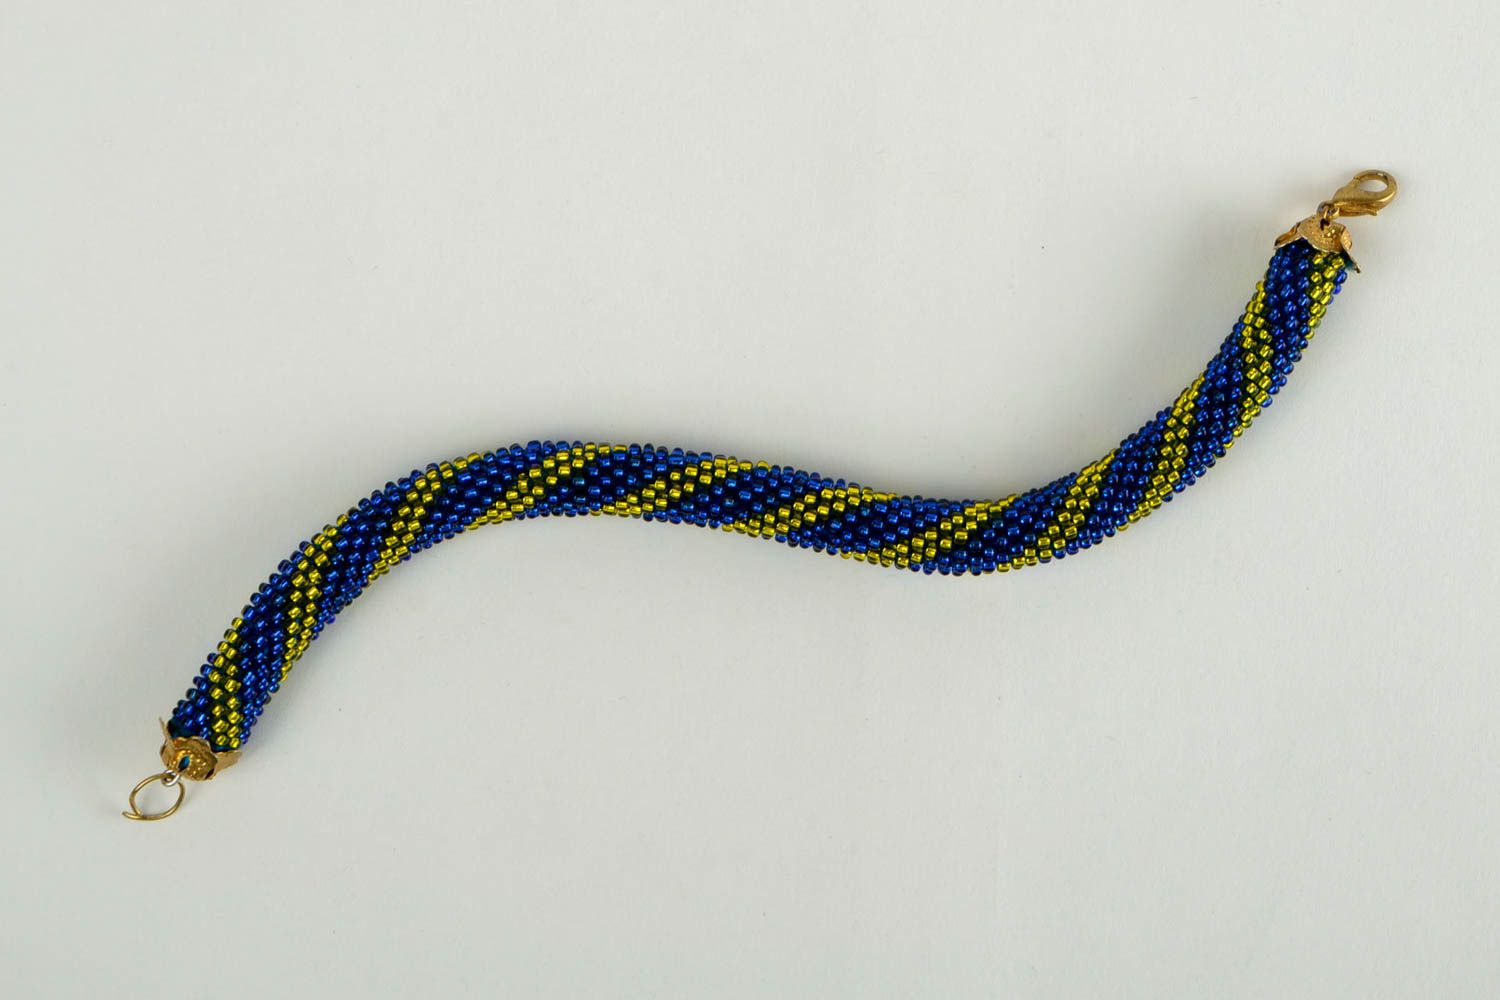 Beaded cord bracelet in dark blue and yellow beads for young girls photo 2